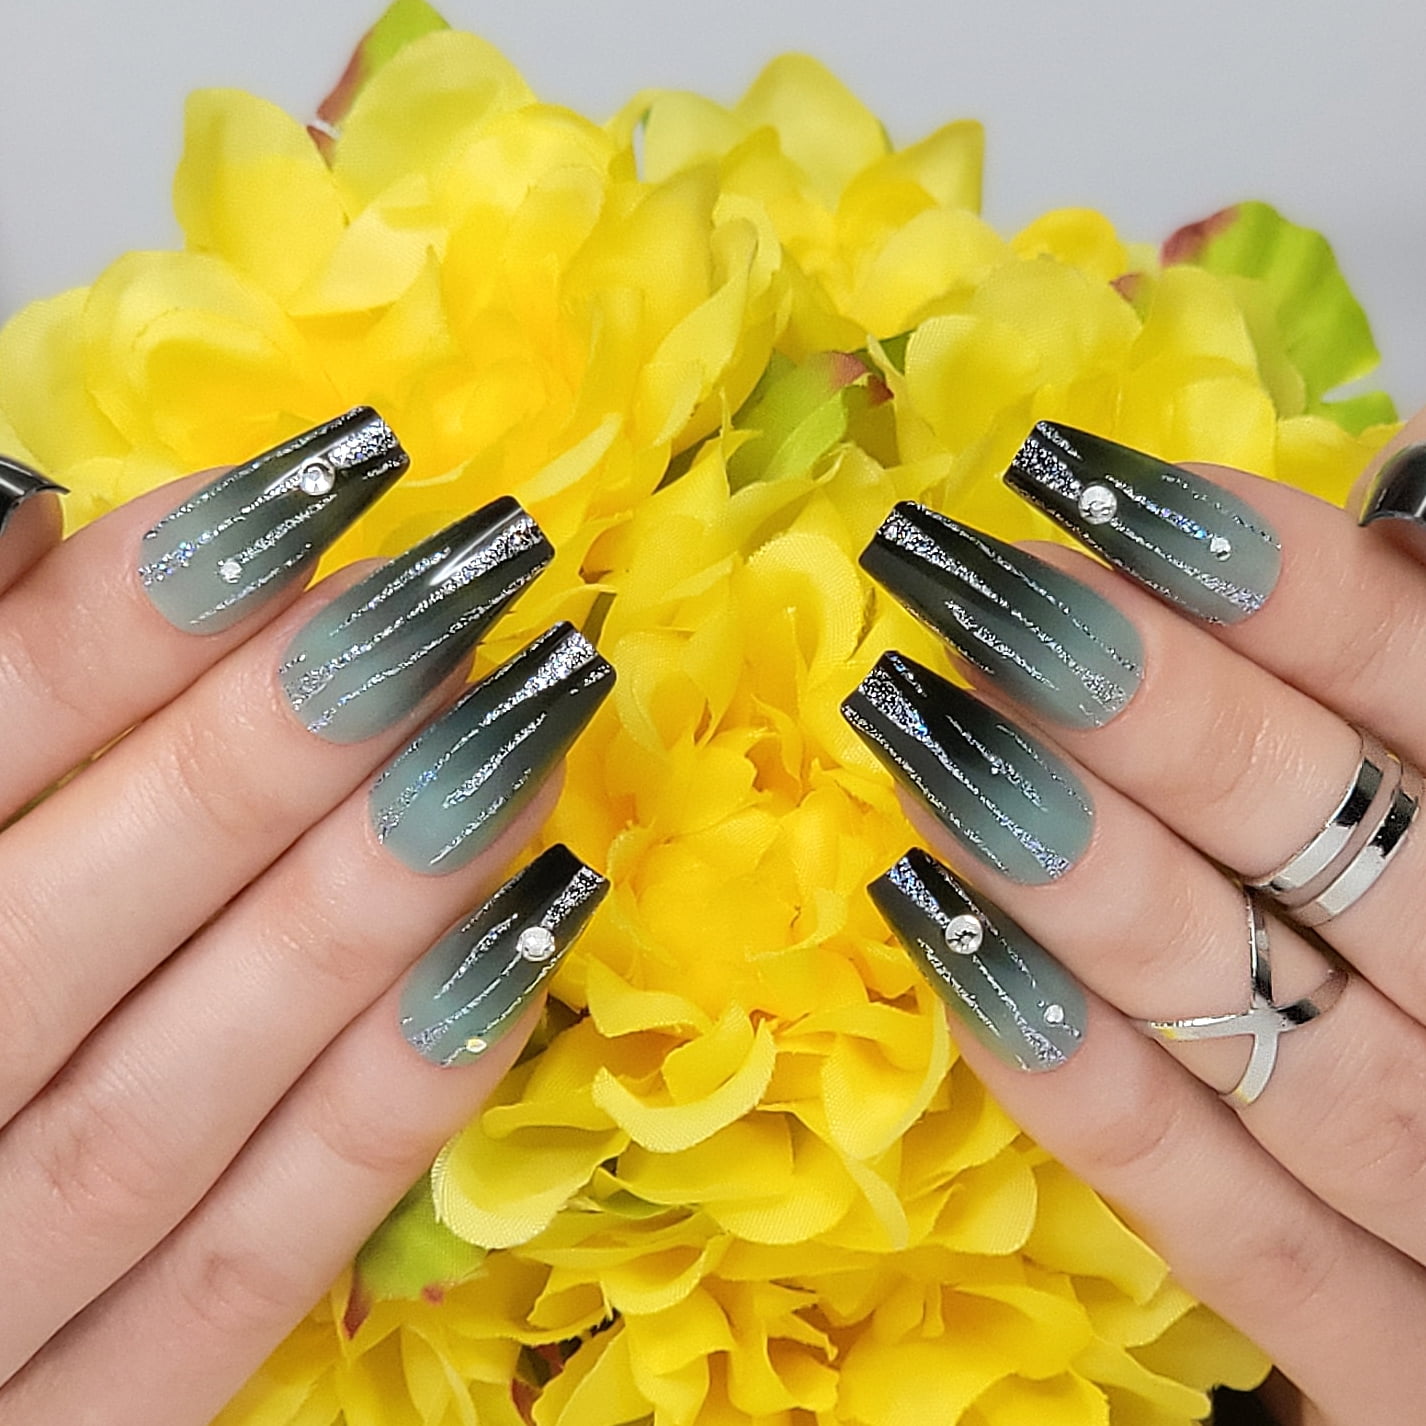 Gorgeous yet fun nail designs that will look amazing for summer vacay!